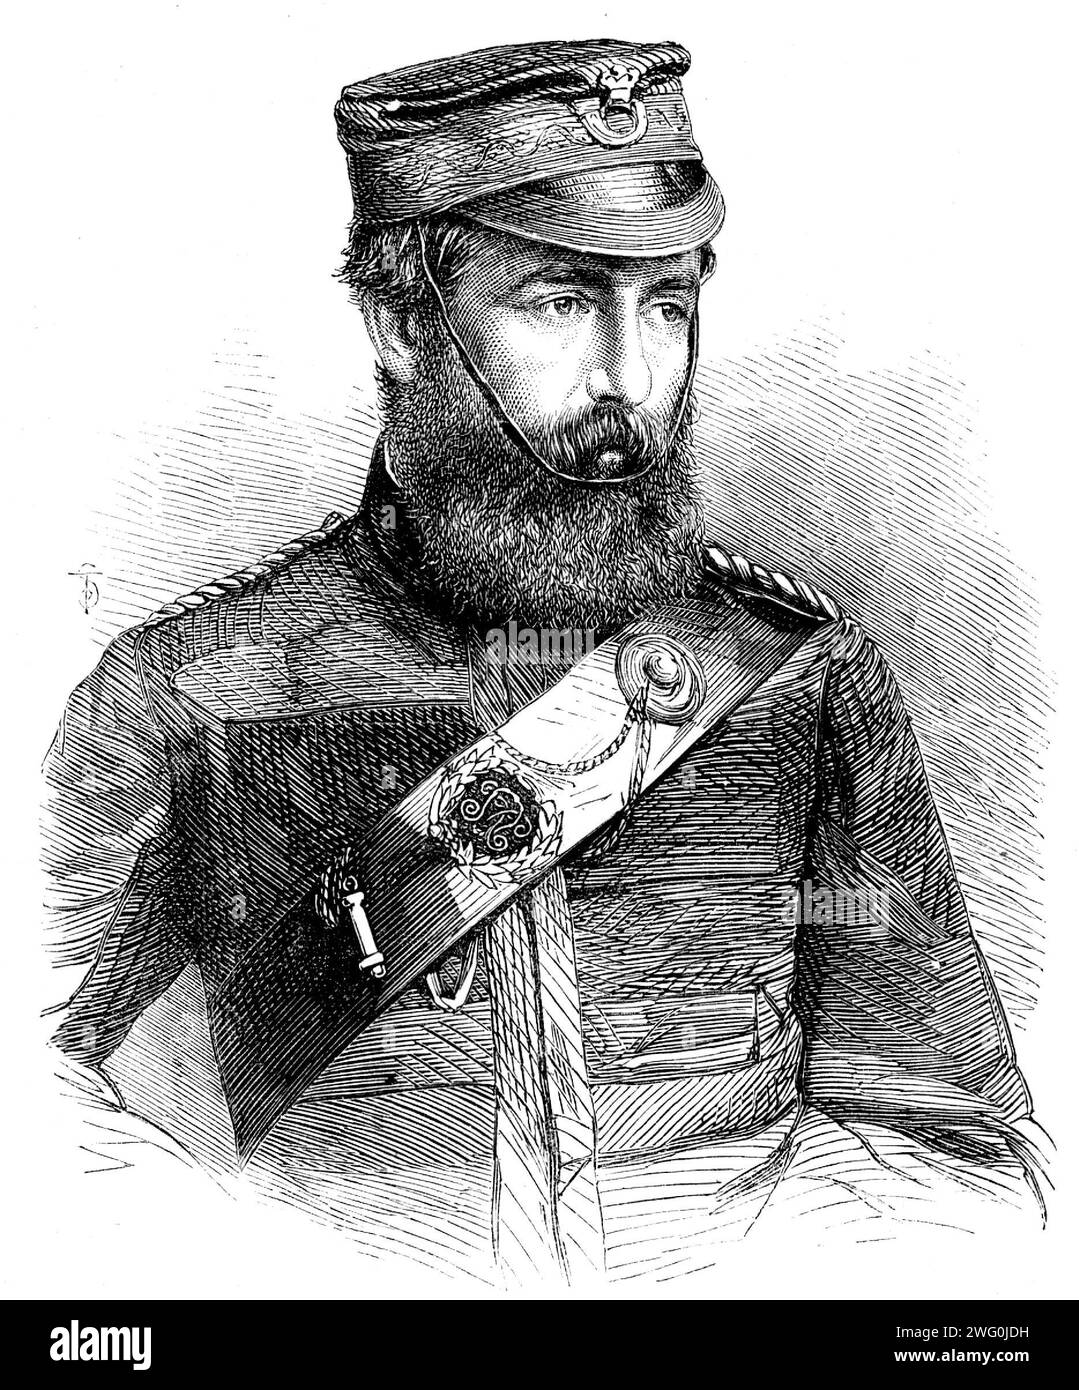 Mr. Pixley, of the Victoria Rifles, winner of the Queen's Prize at the National Rifle Contest, 1862. 'This gentleman is by no means an undistinguished rifleman, having fairly earned his marksman's badge at Hythe last year, where he likewise won his sectional prize. He has further carried off honours in the shooting of his own company (No. 1) of the Victoria, besides obtaining a rifle offered by some private donor. Mr. Pixley, however, had by no means a walk over, as he was pressed hard by two men in his own squad, and at the close of the firing had only two points to spare. He was, of course, Stock Photo